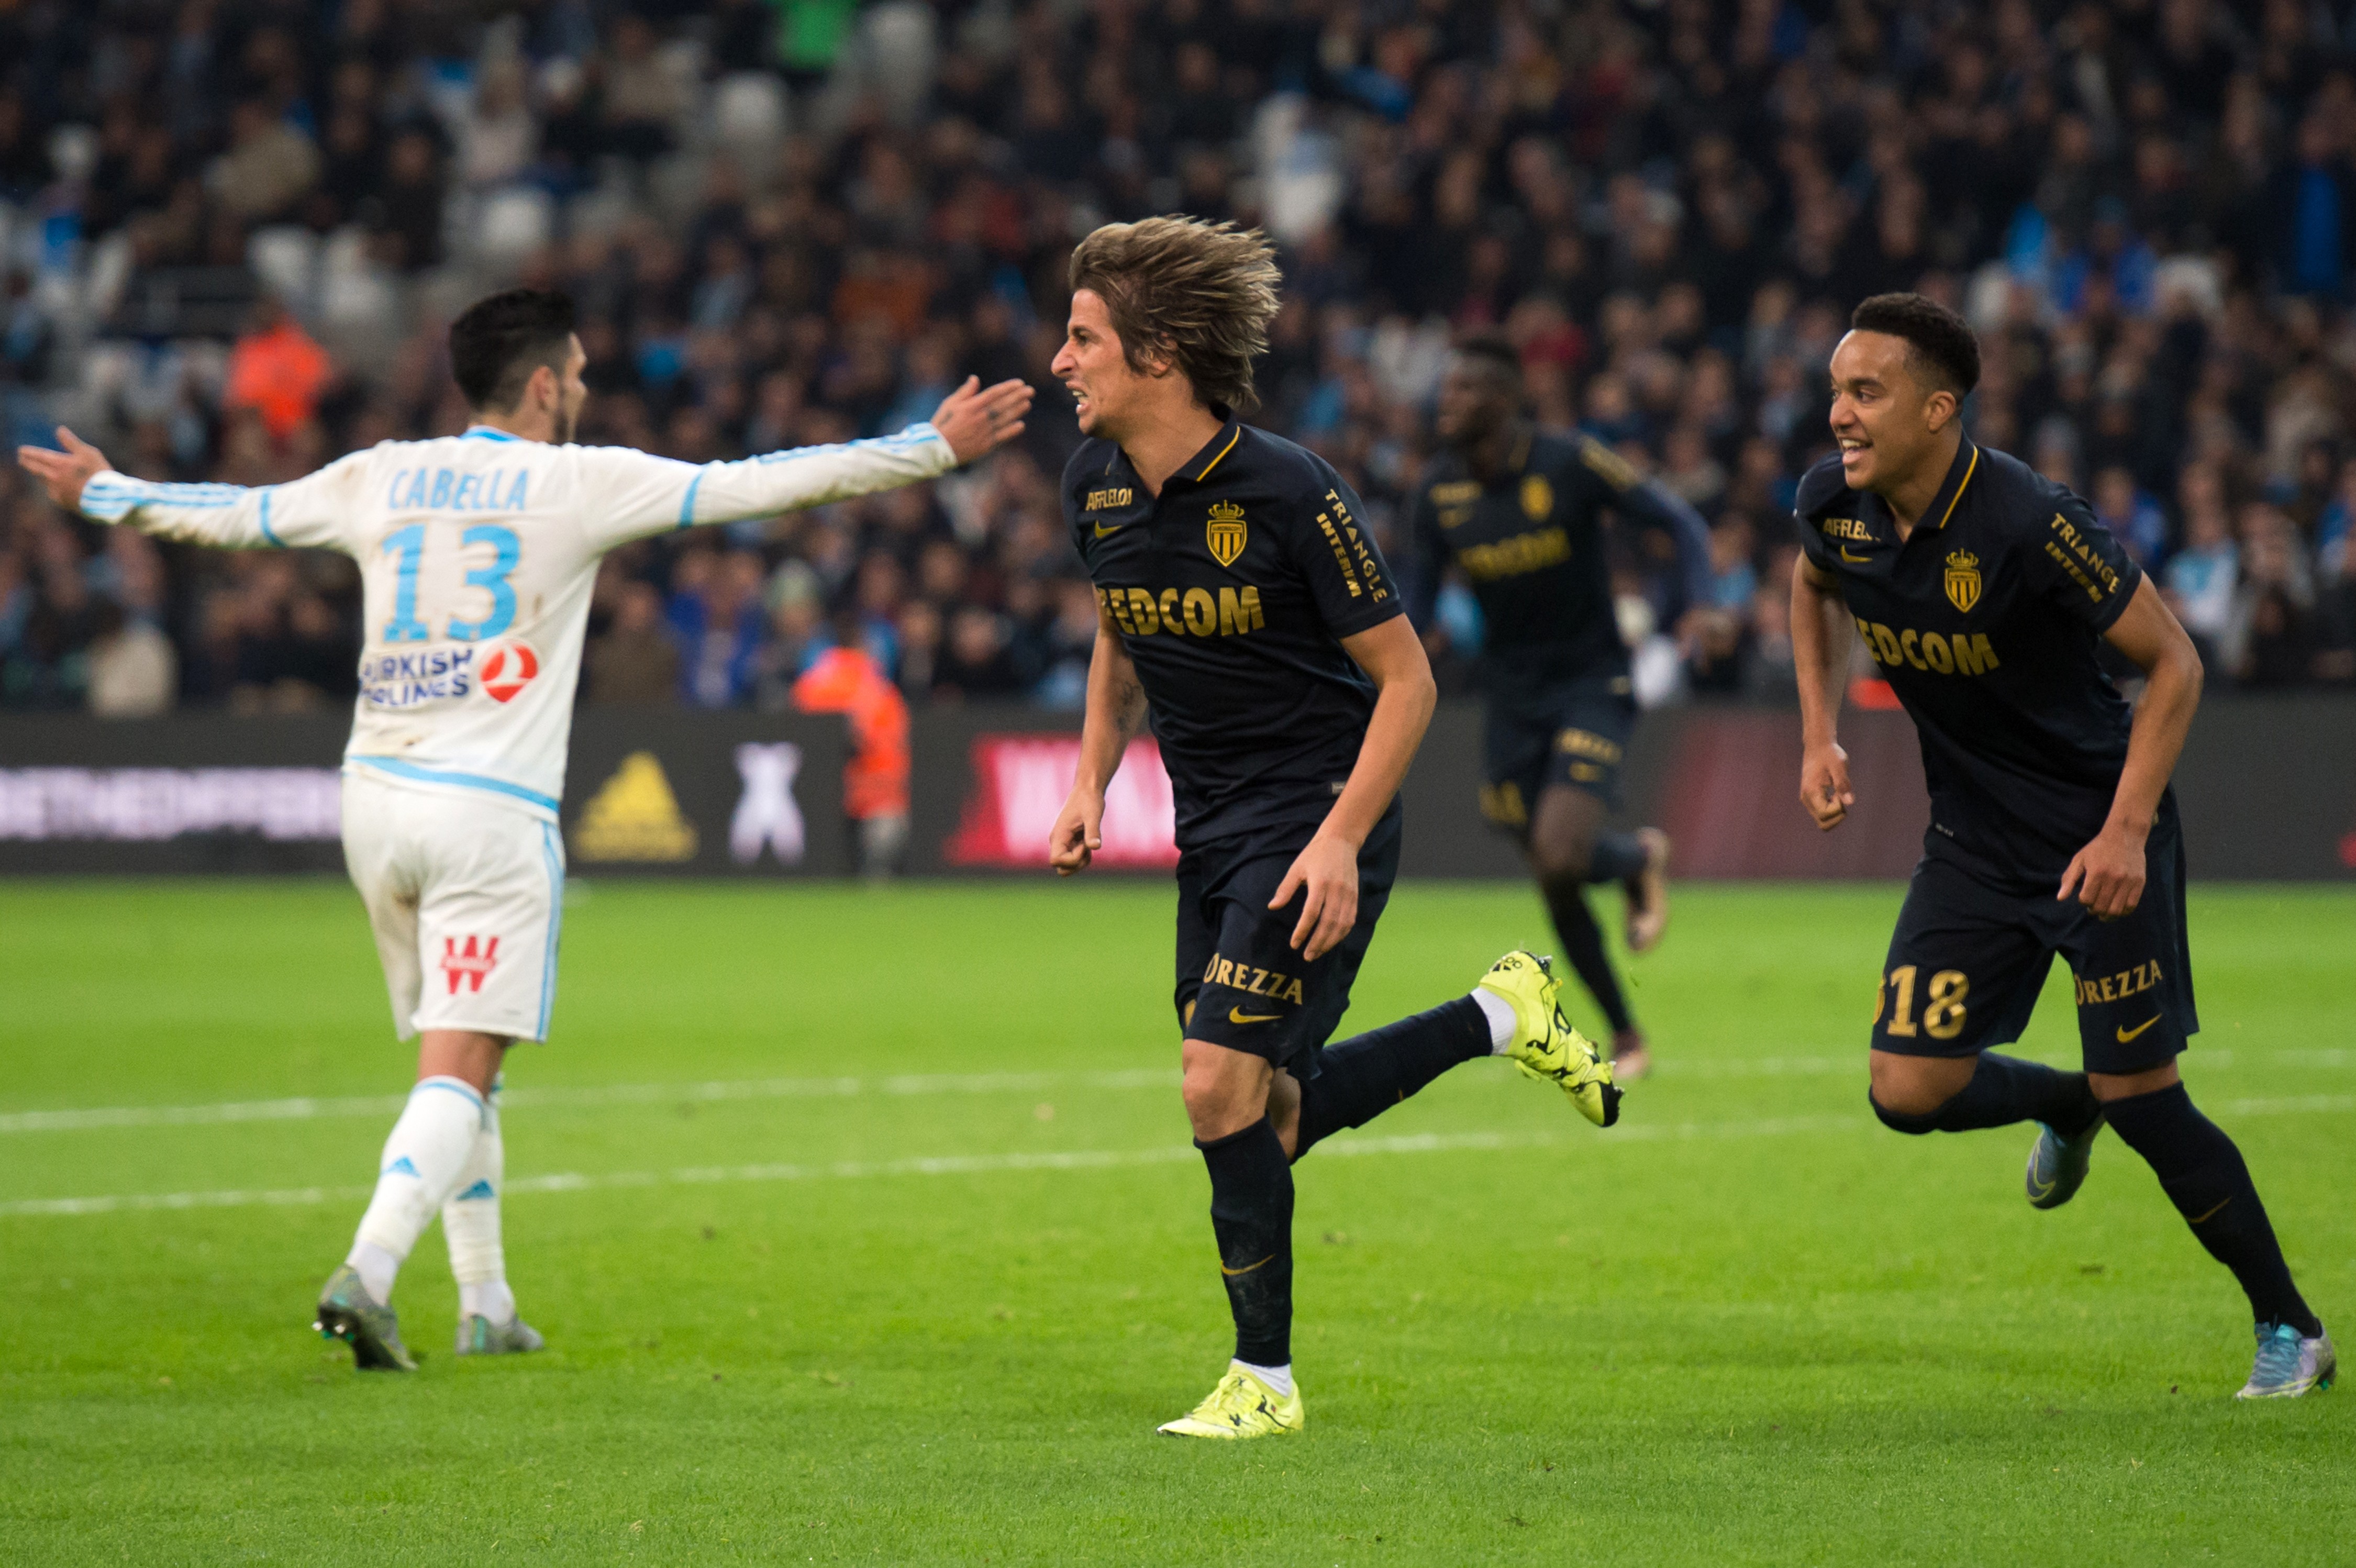 Monaco's Portuguese defender Fabio Coentrao (C) celebrates after scoring a goal during the French L1 football match Olympique de Marseille vs AS Monaco on November 29, 2015 at the Velodrome stadium in Marseille, southern France. AFP PHOTO / BERTRAND LANGLOIS / AFP / BERTRAND LANGLOIS        (Photo credit should read BERTRAND LANGLOIS/AFP/Getty Images)